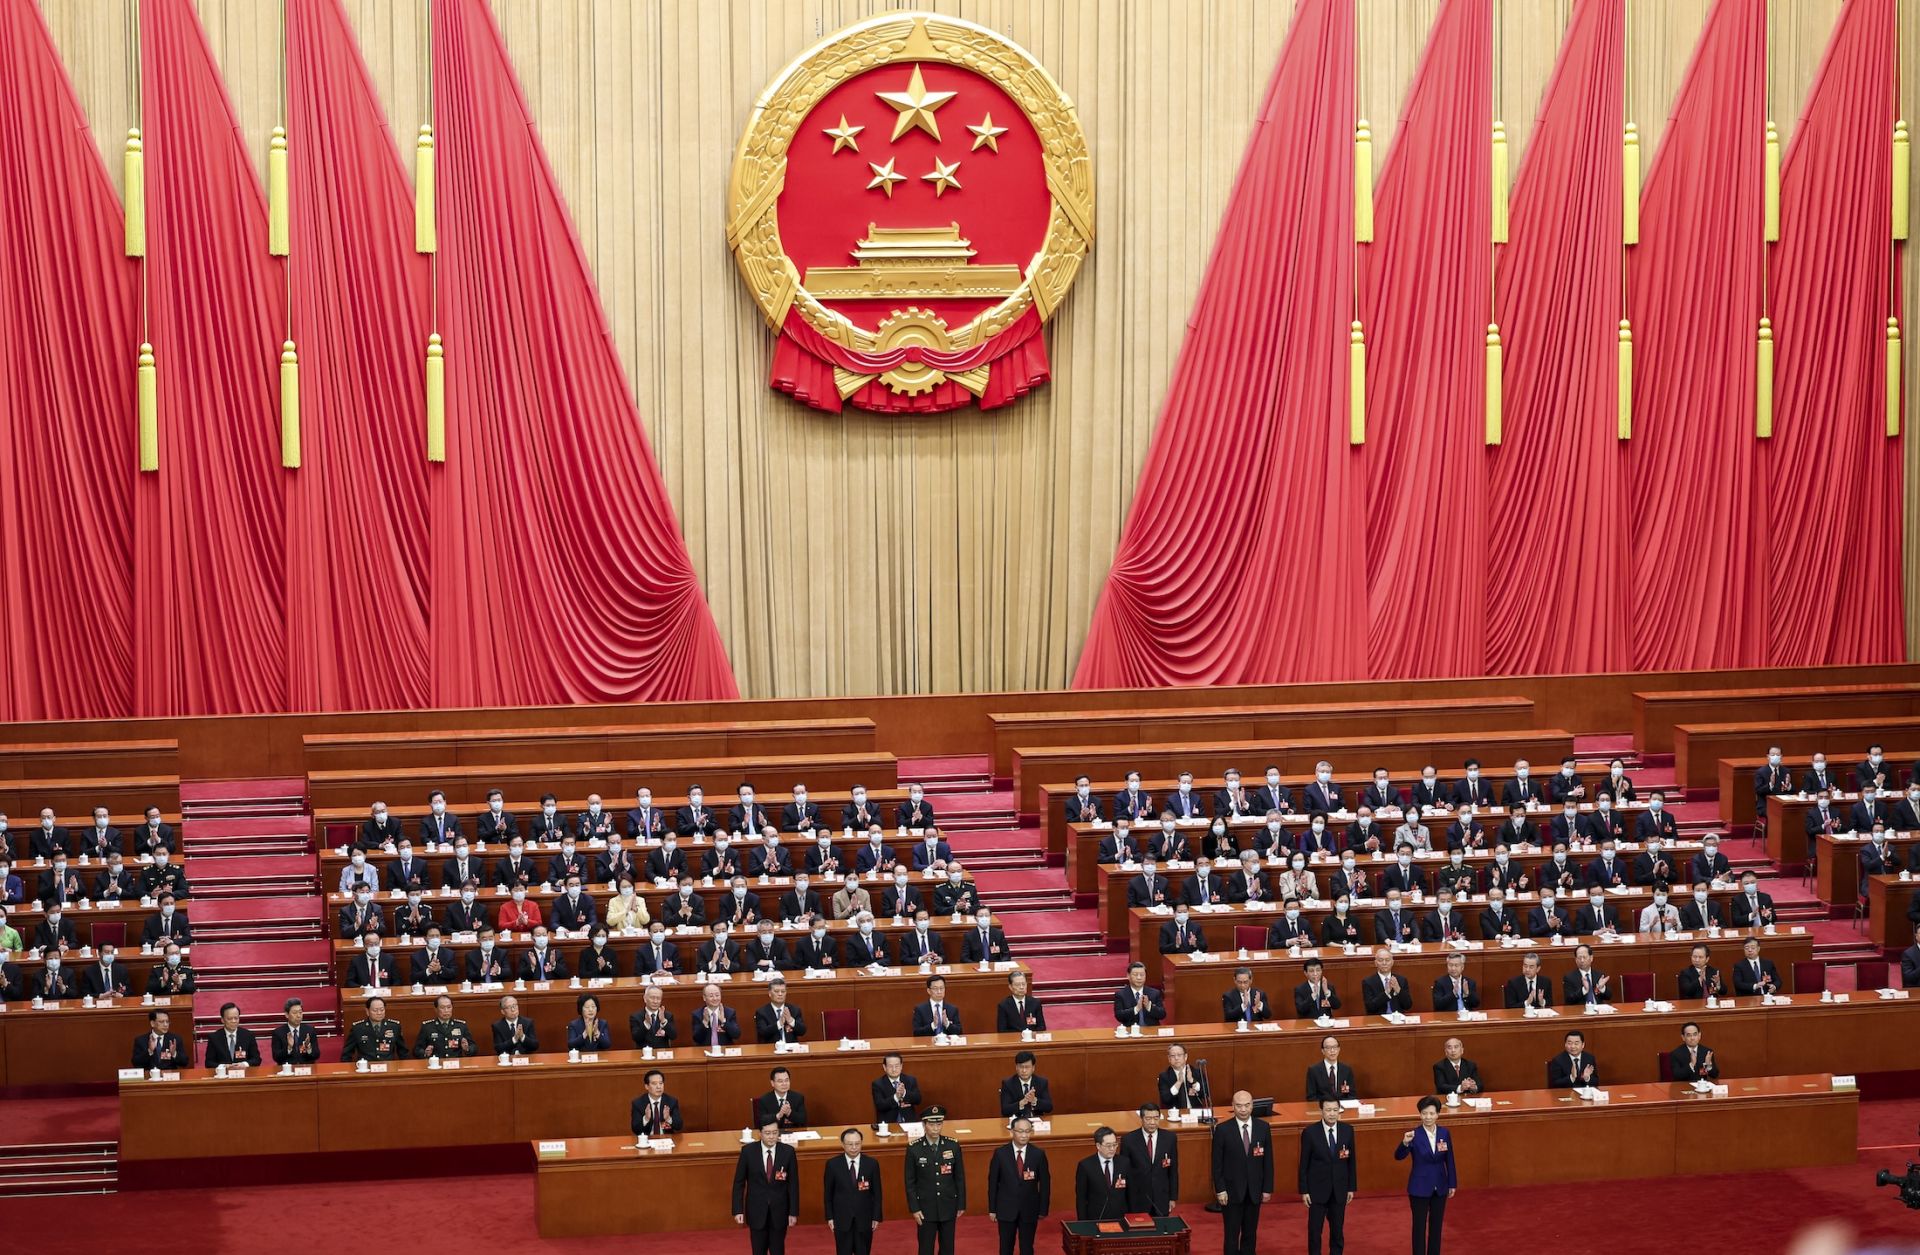 Chinese officials at the Fifth Plenary Session of the National People's Congress on March 12, 2023 in Beijing.